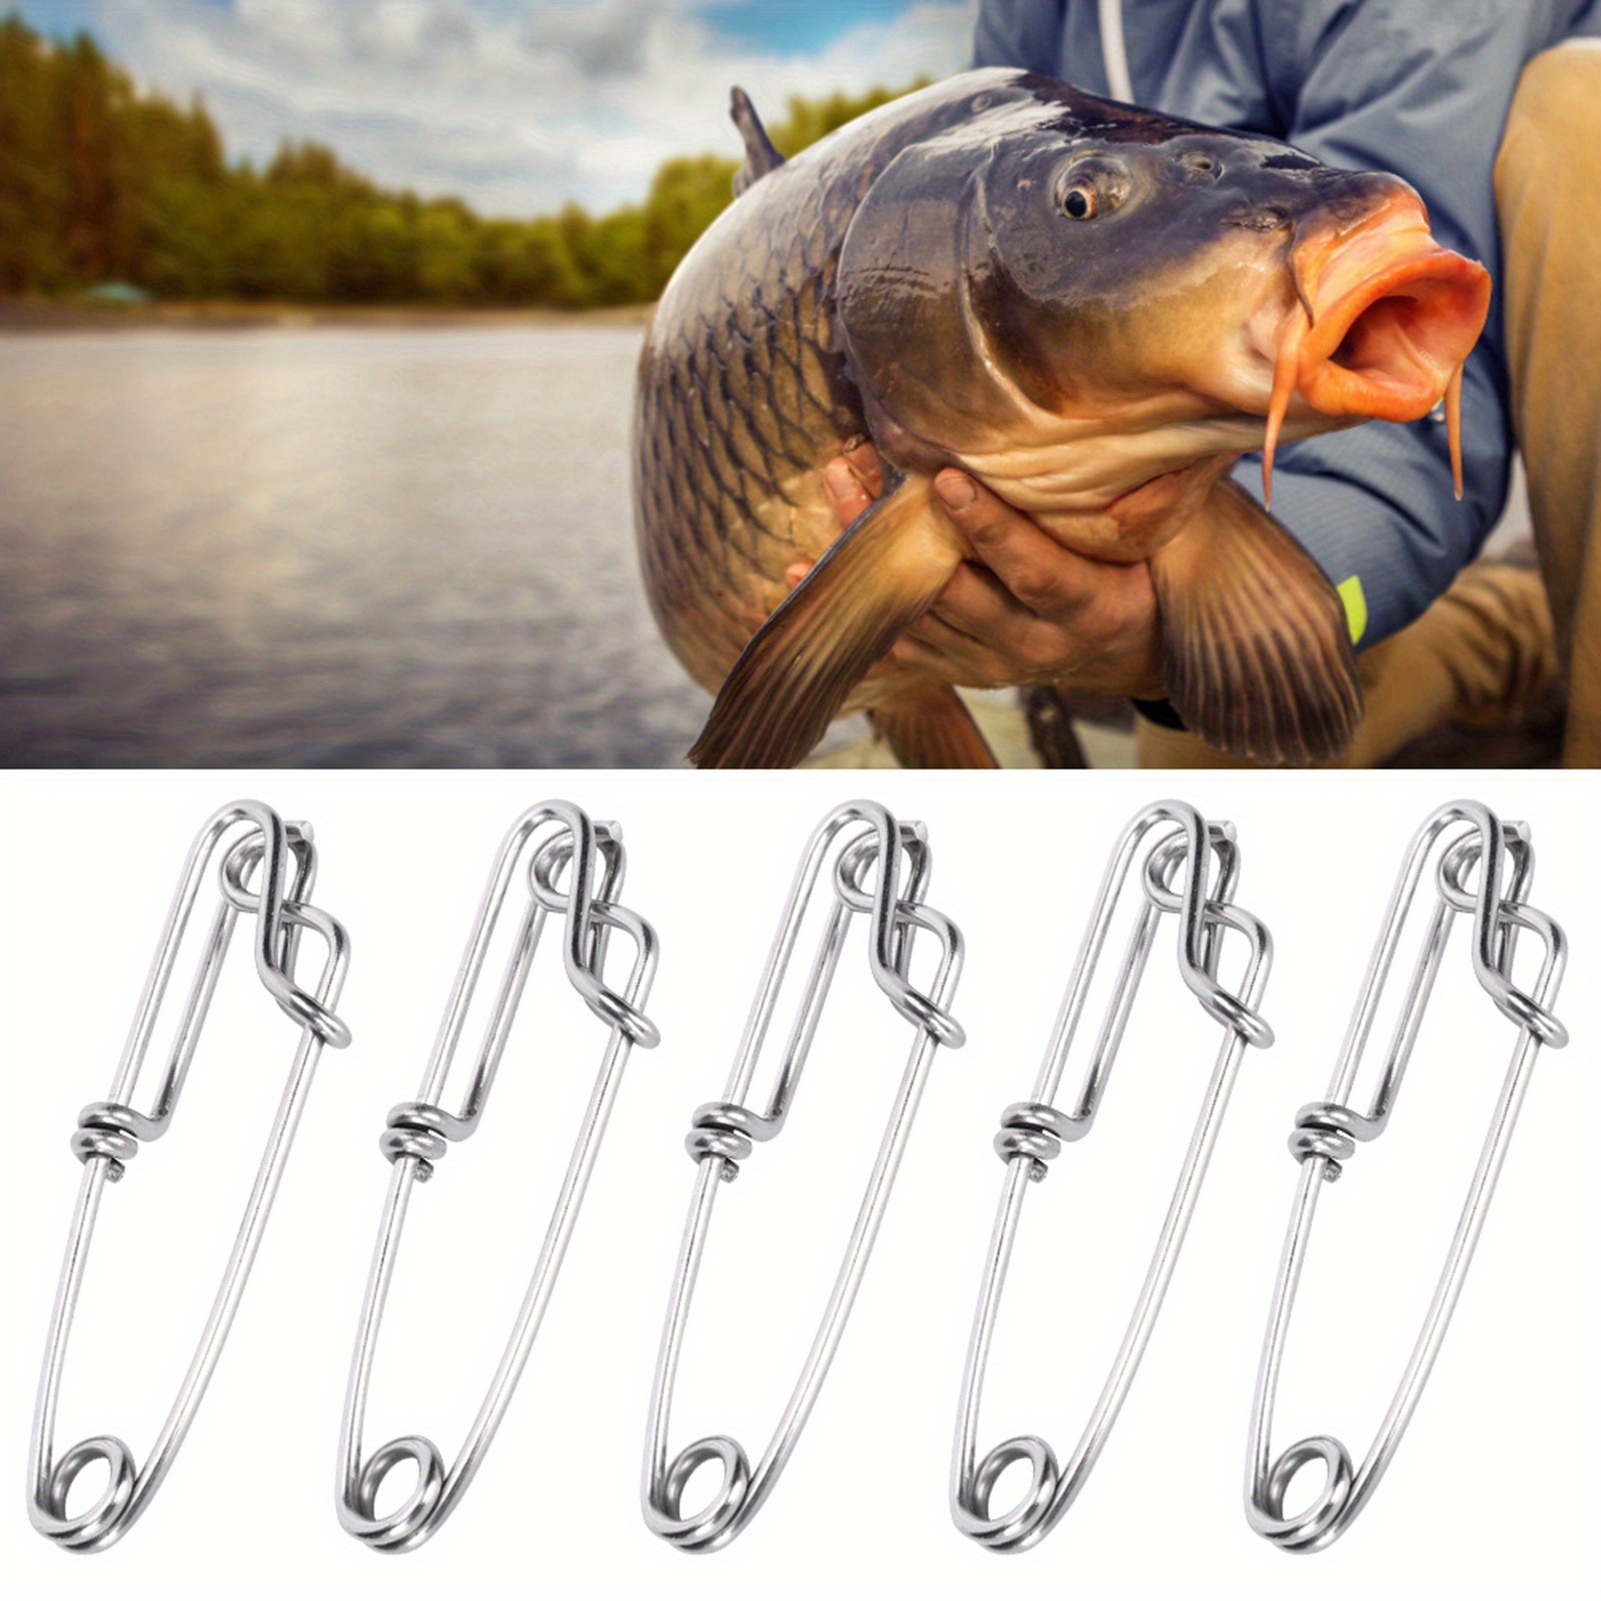 Fishing Snap Stainless Steel Long Line Clips Fishing Tuna Clip